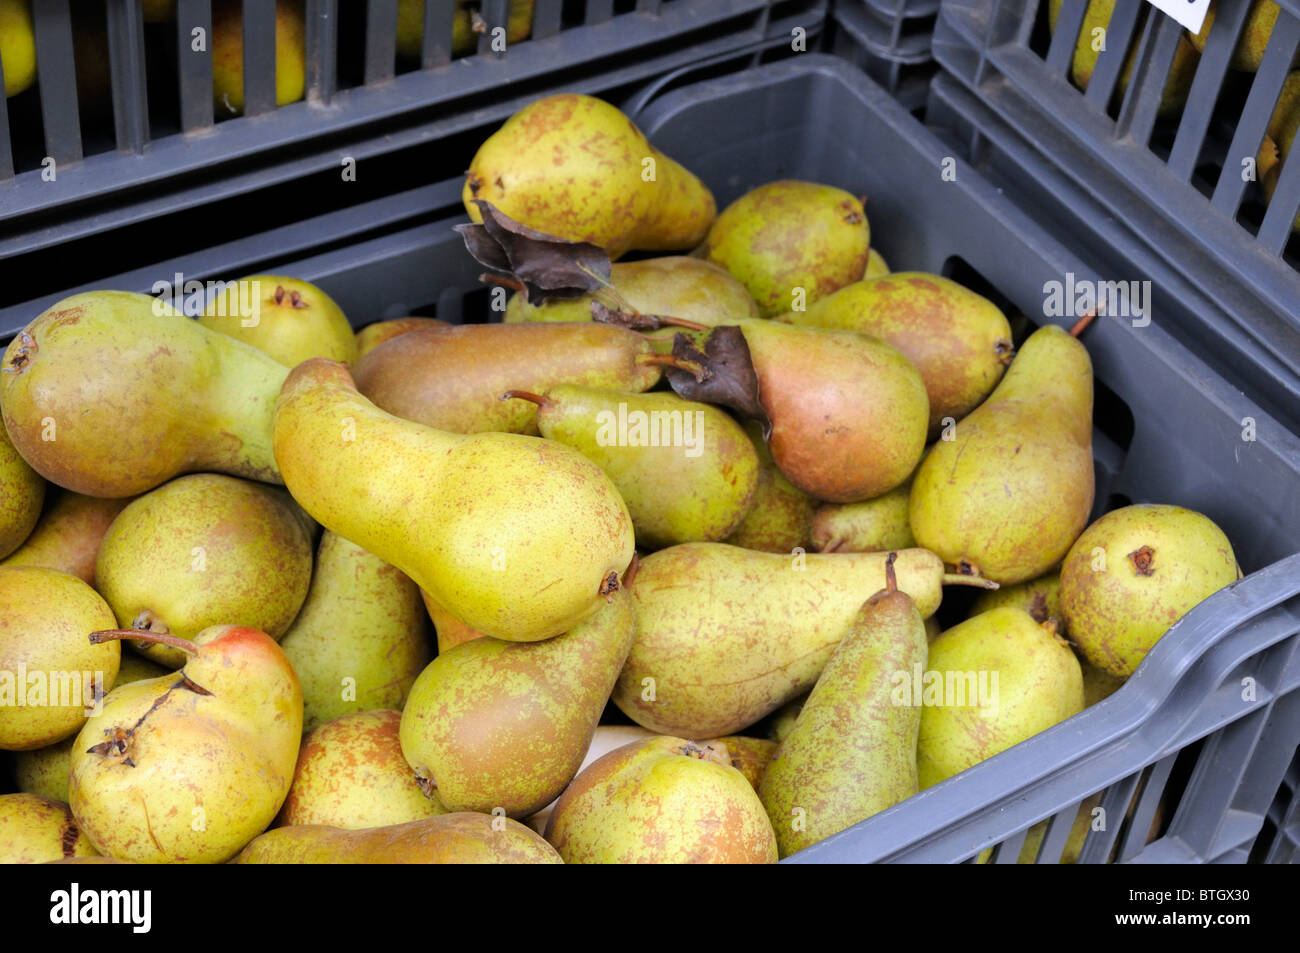 Doyenne De Comice Pears in crate, Covent Garden London England UK Stock Photo